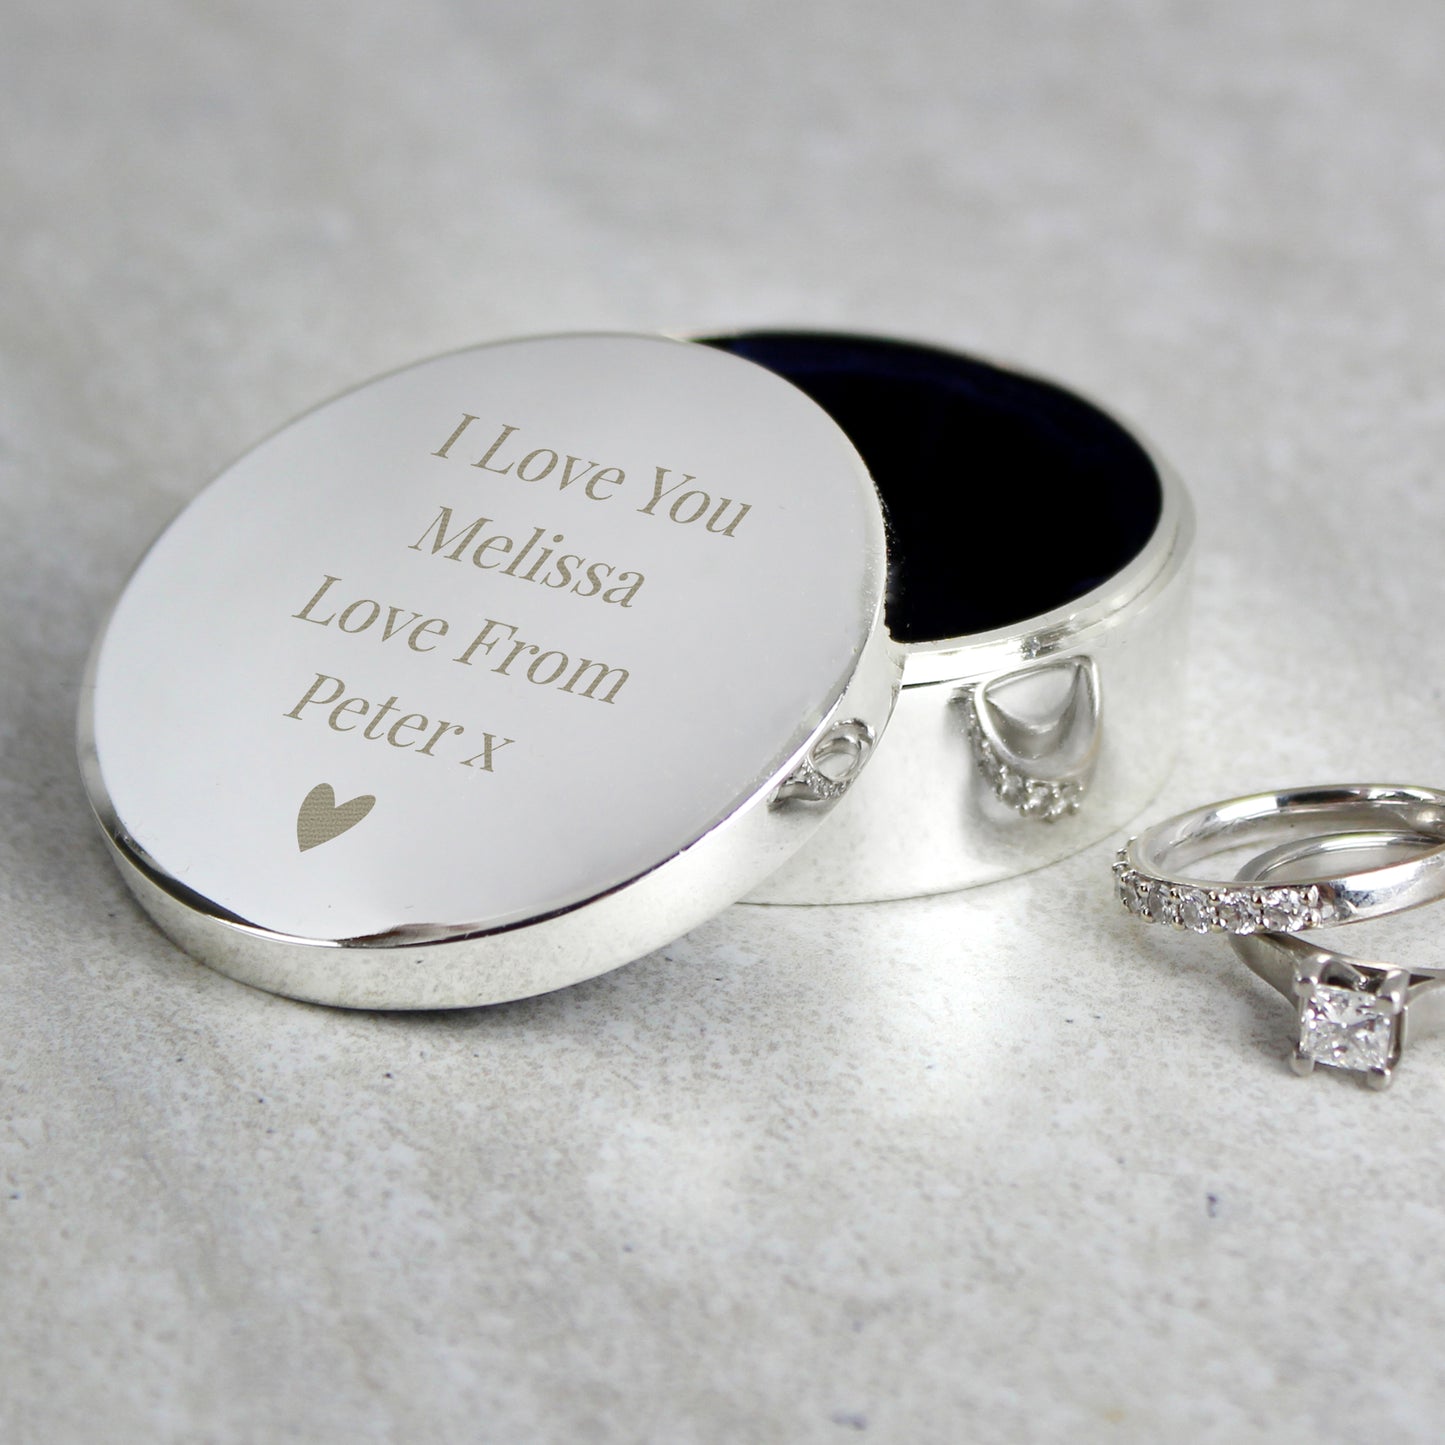 Personalised ring box with love heart and your own text messge